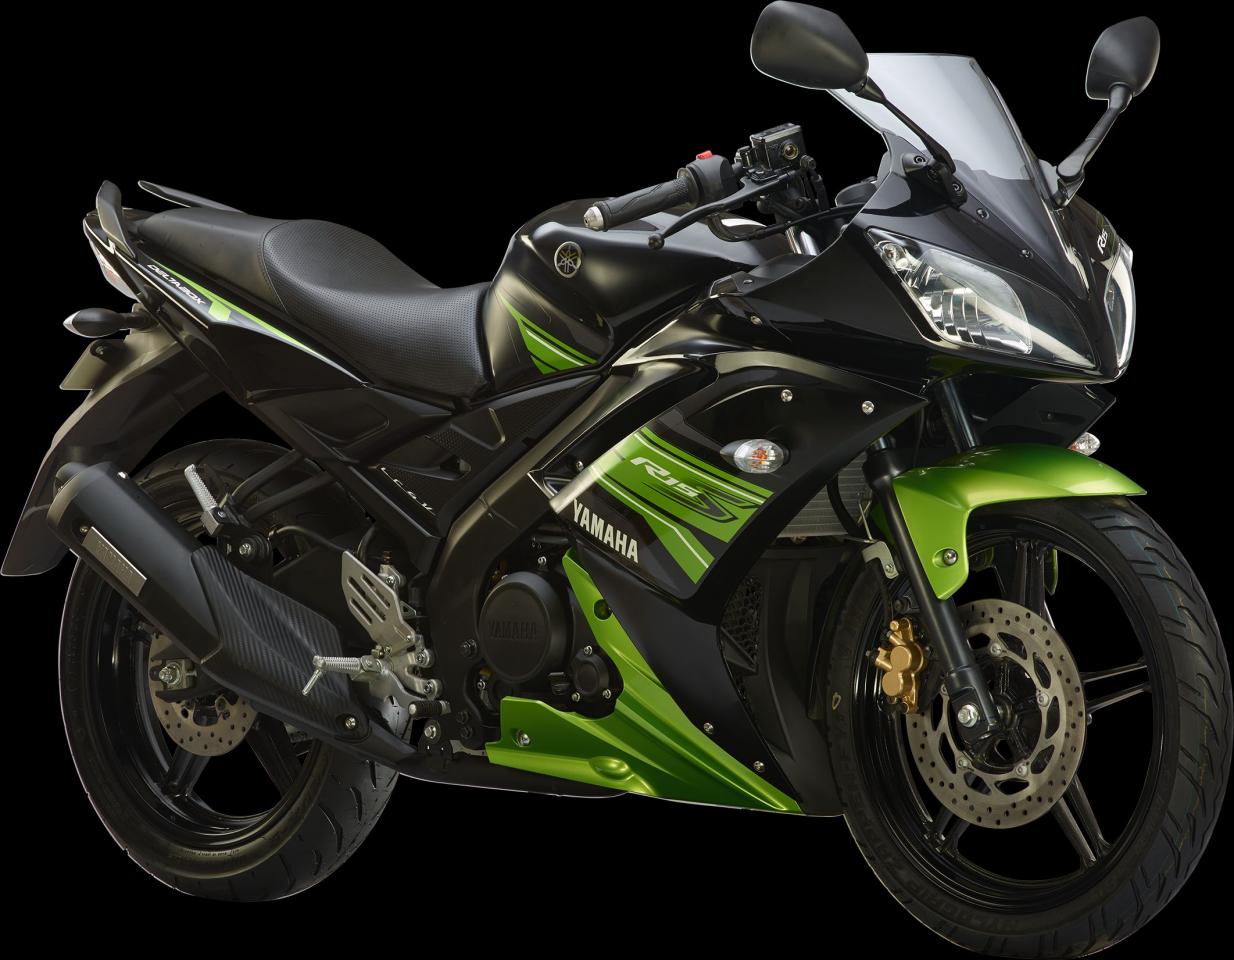 Yamaha R15 S launched at INR 1.14 lakhs